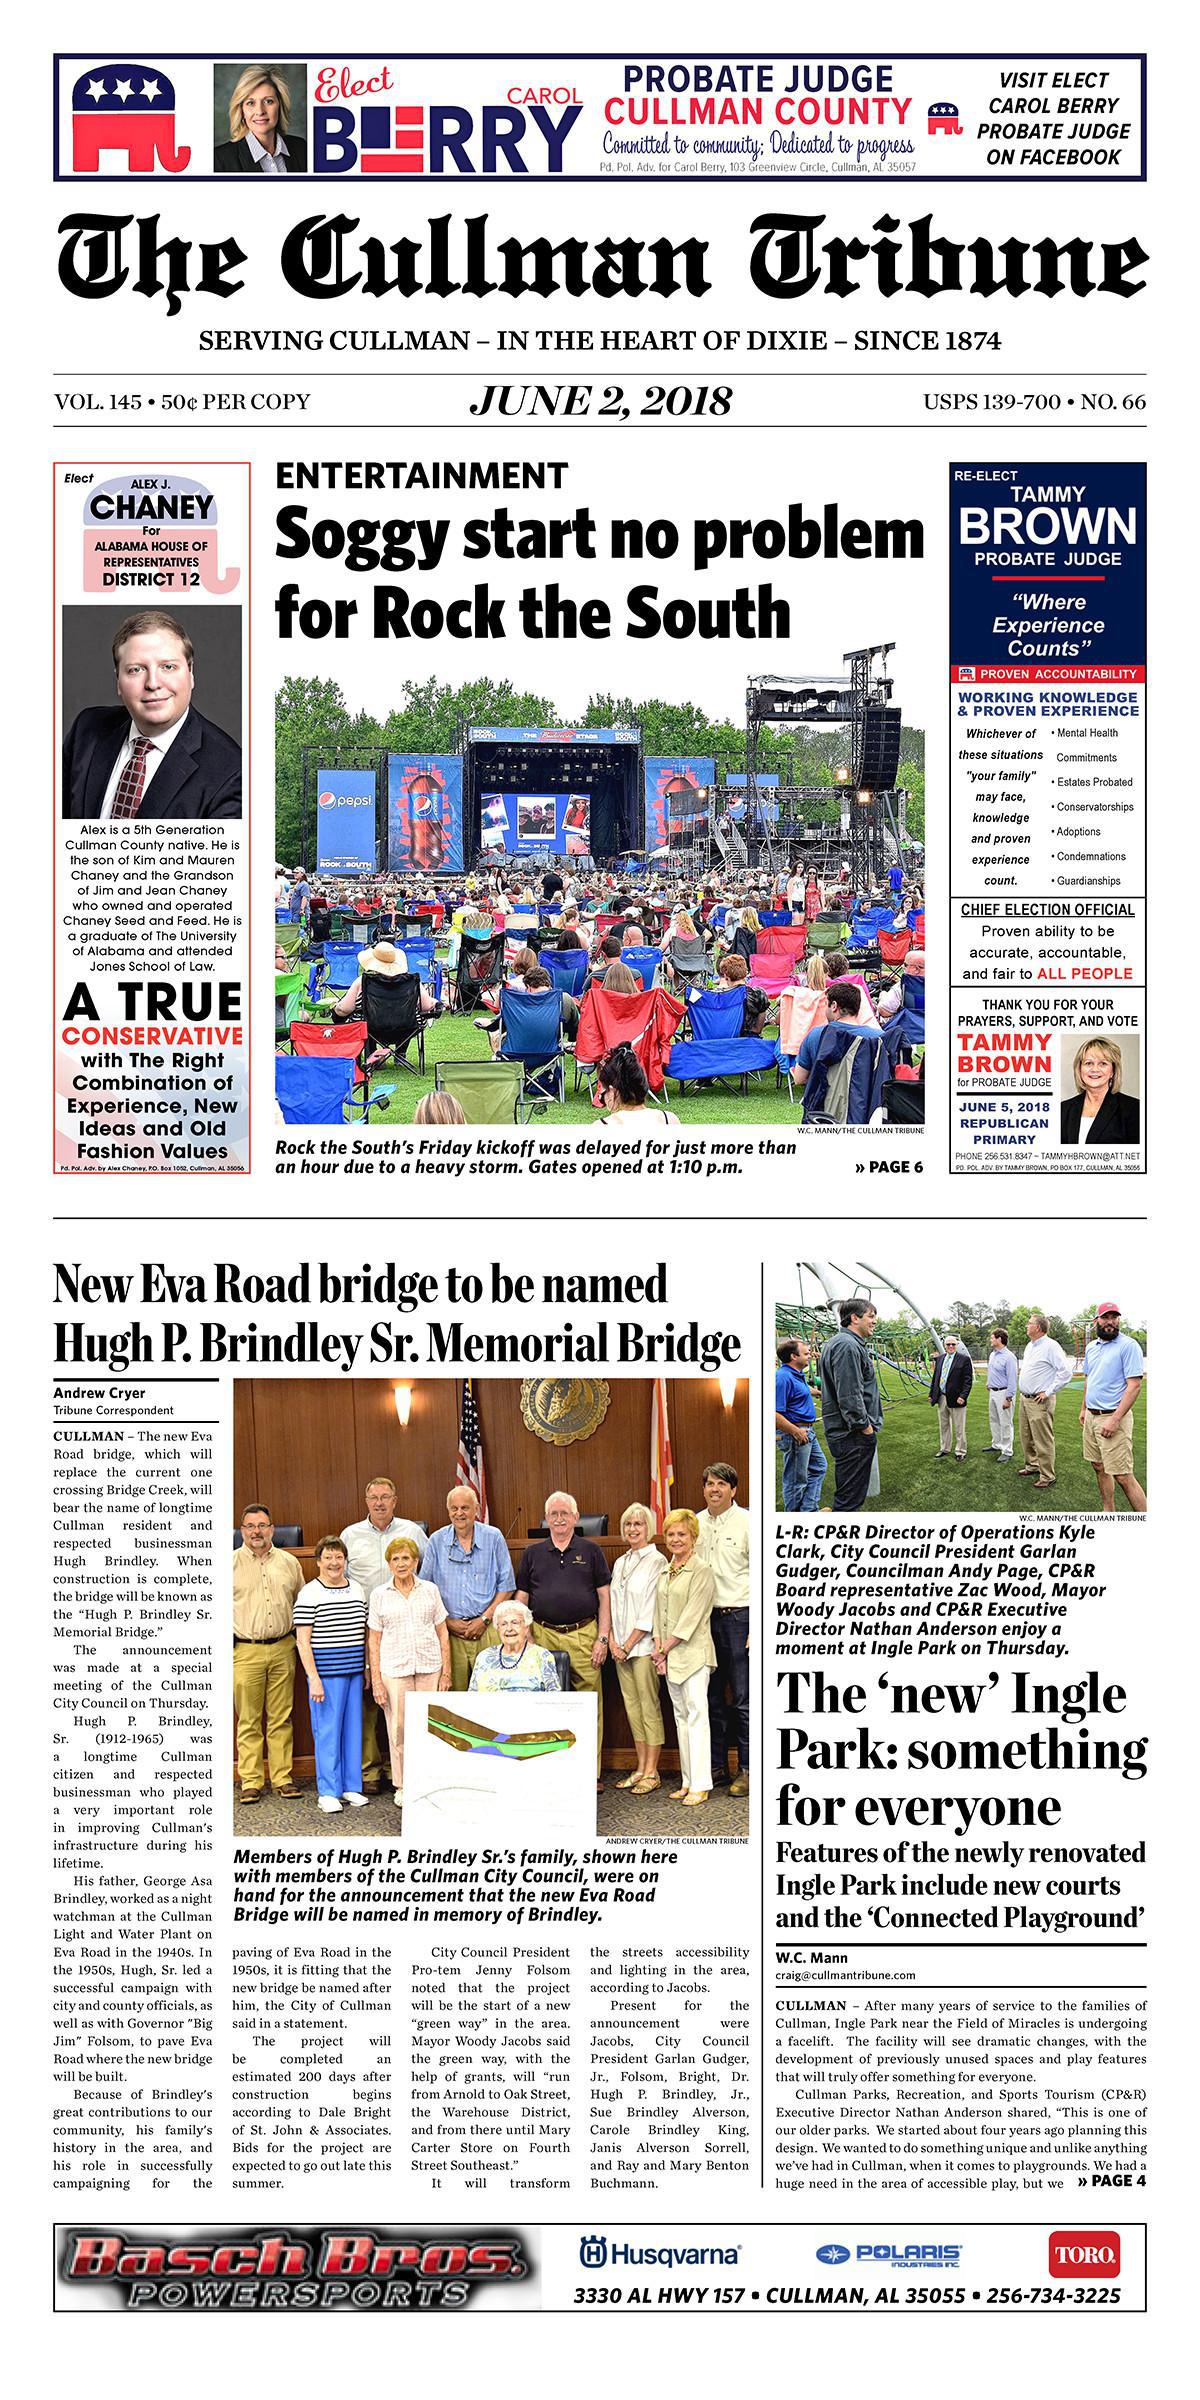 Good Morning Cullman! The 06-02-2018 edition of the Cullman Tribune is now ready to view